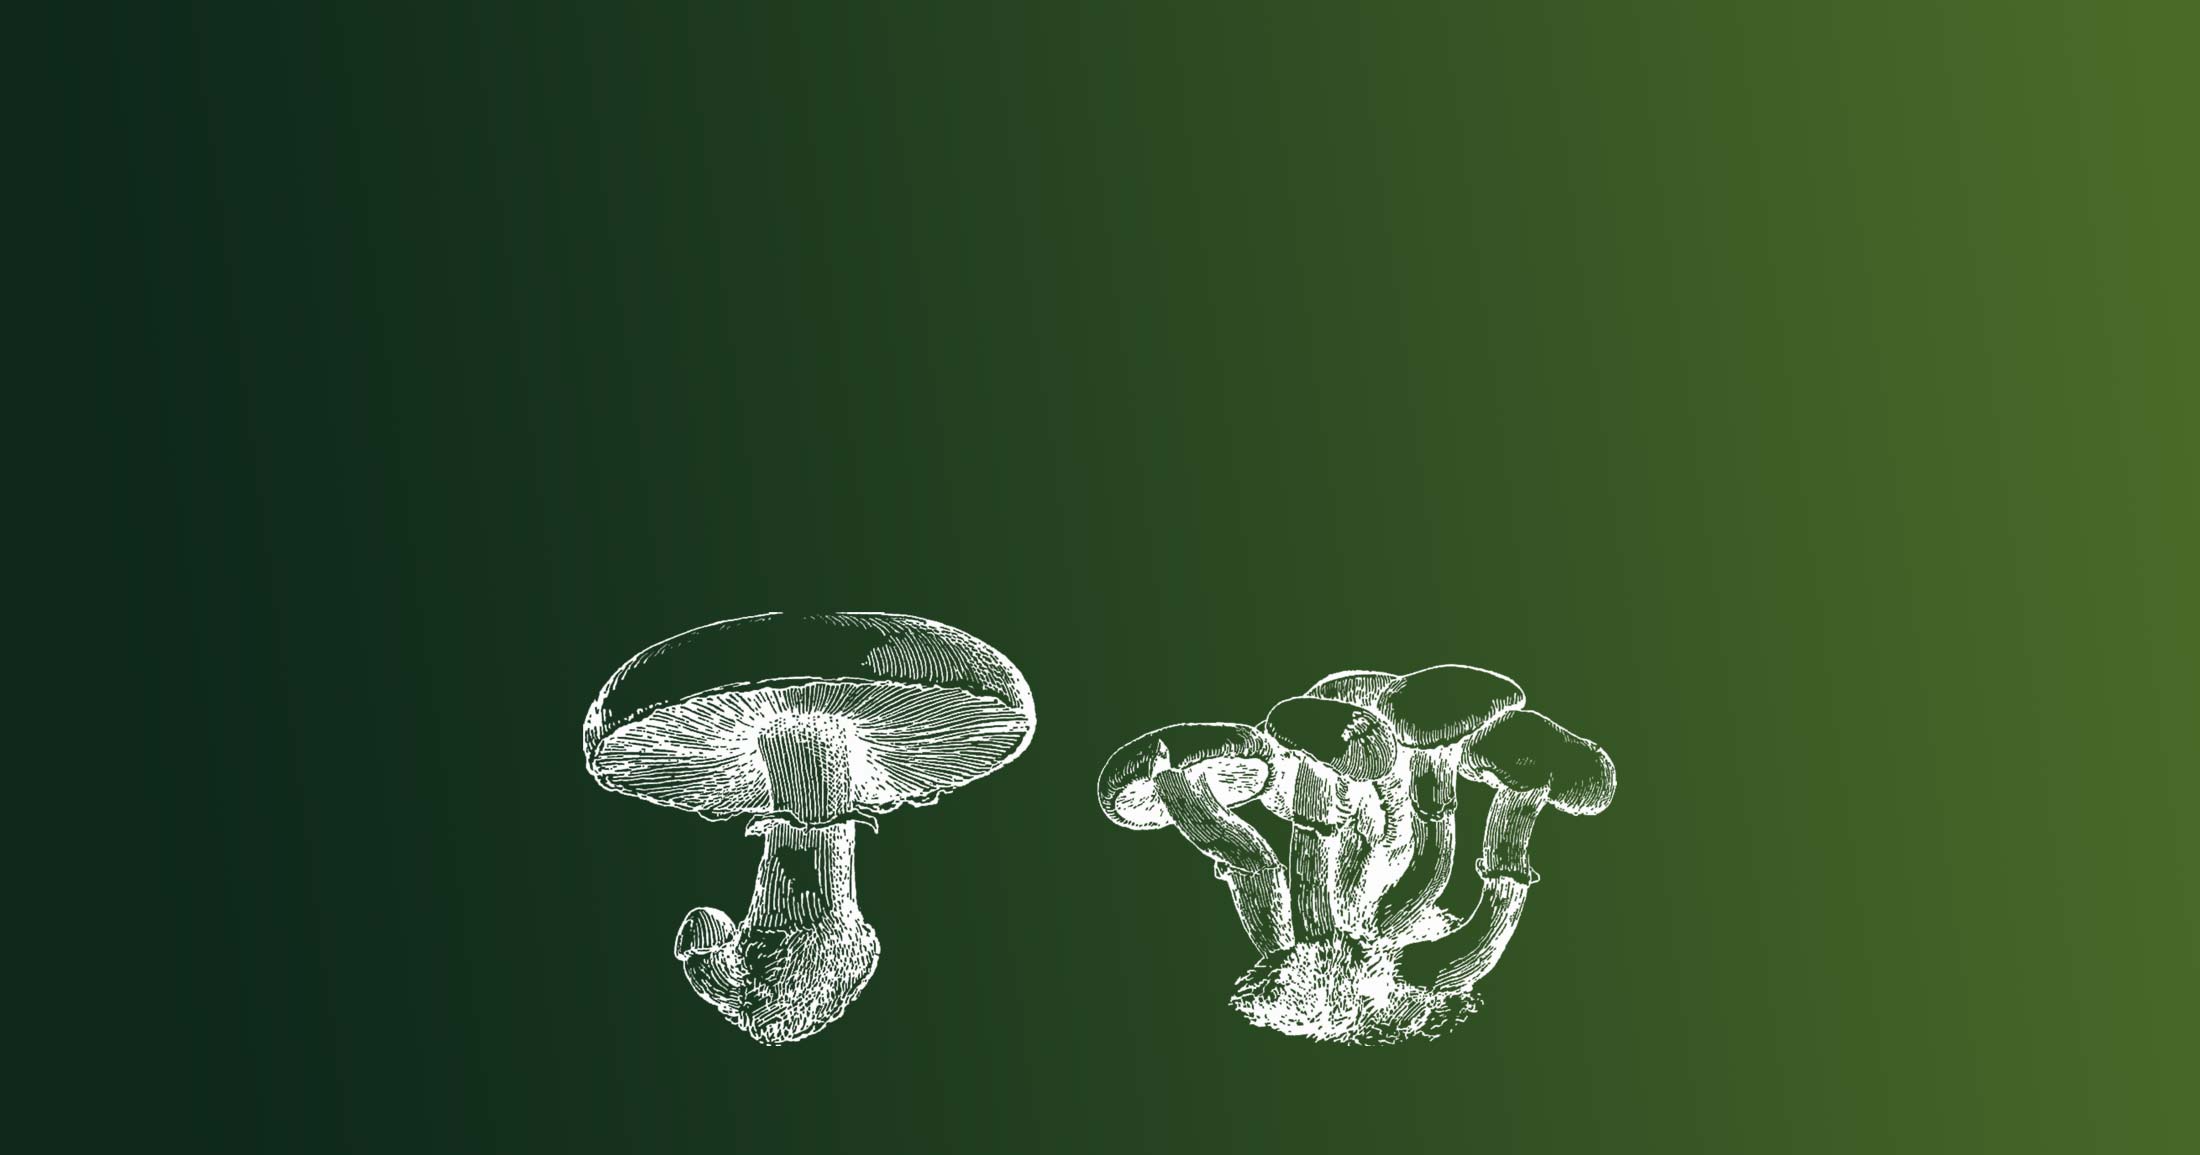 Small detailed illustrations in white, of a cluster of mushrooms.